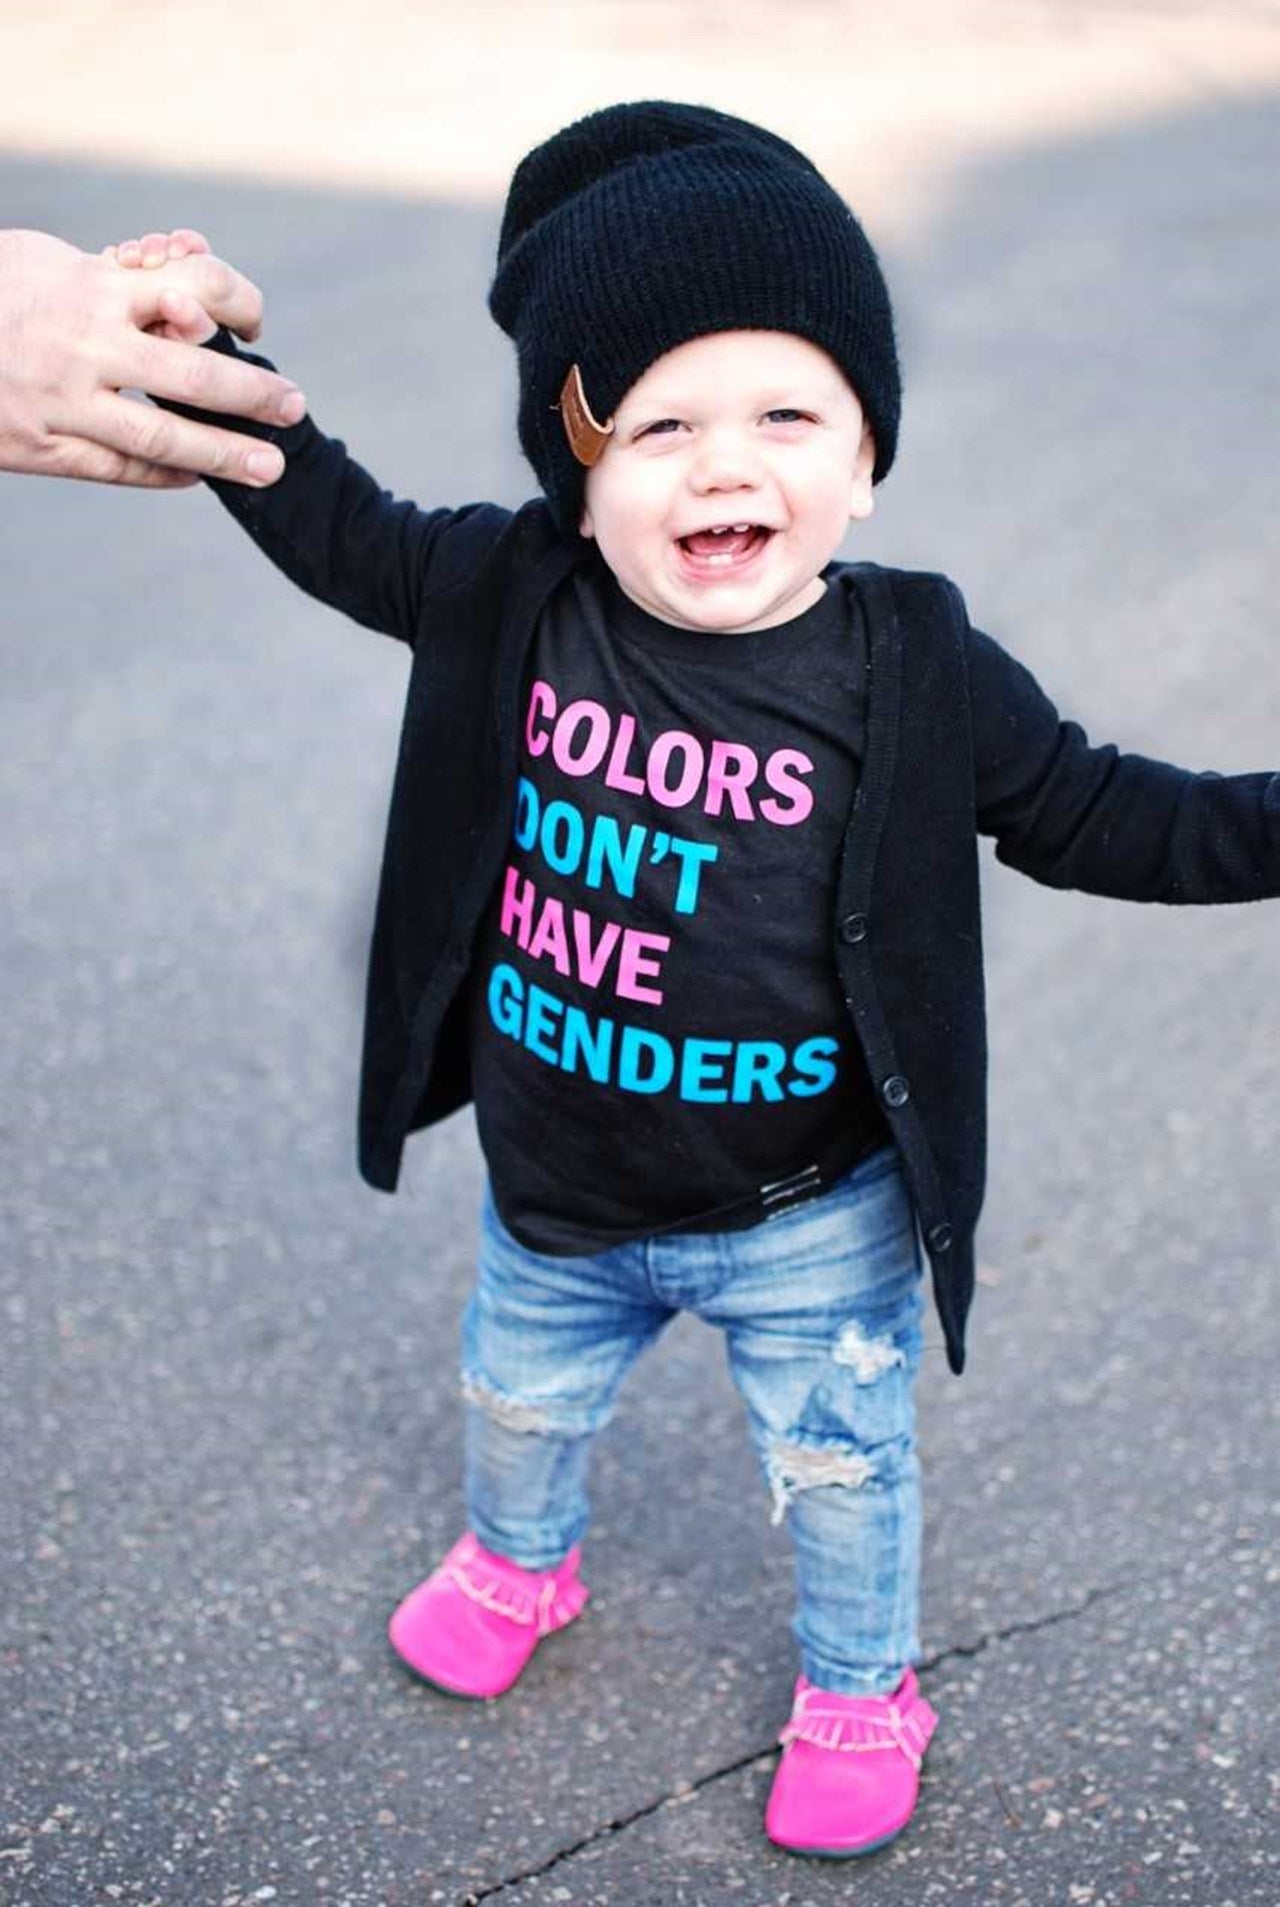 Colors Don't Have Genders (Youth)